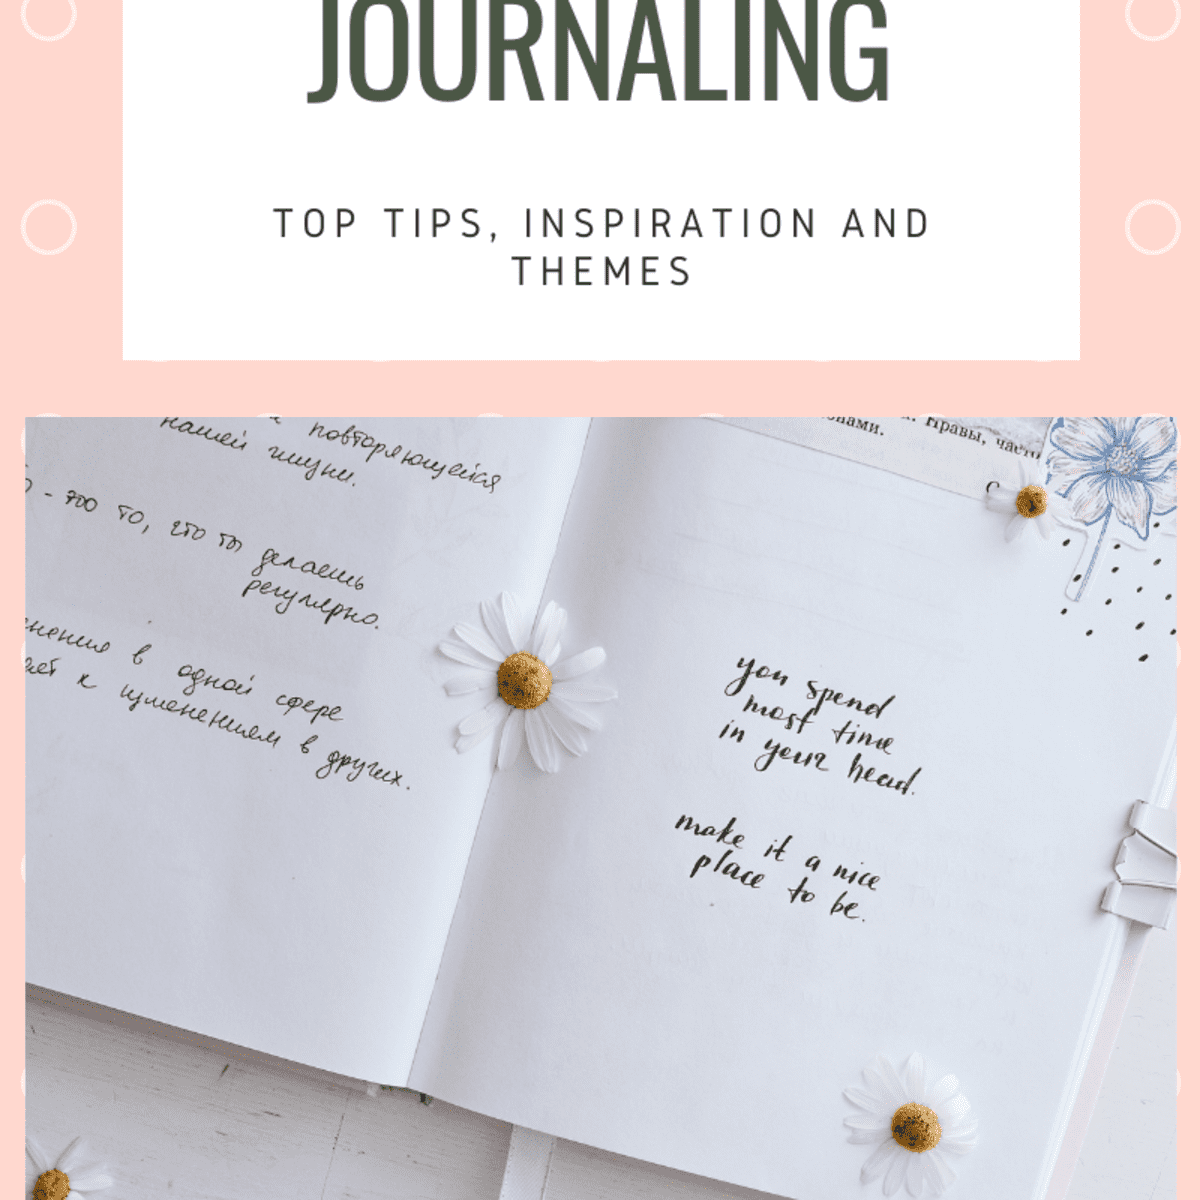 How to Journal: Writing Tips, Journal Topics, and More! 